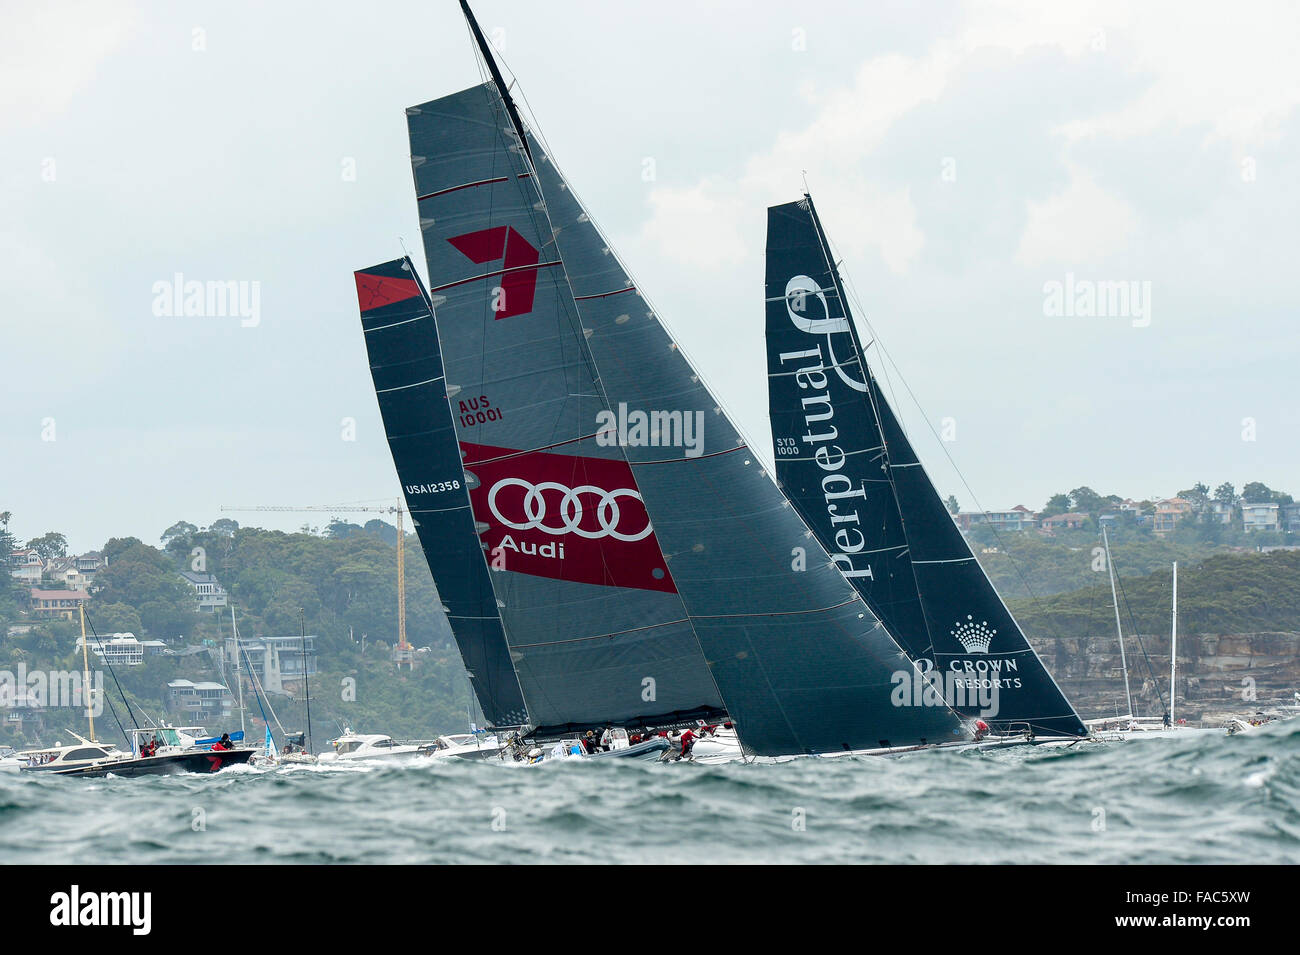 Sydney, Australia. 26th Dec, 2015. Rolex Sydney to Hobart Yacht race 2015. Wild Oats XI owned by Robert Oatley from NSW skippered by Mark Richards type RP100, Perpetual Loyal owner/skipper by Anthony Bell from NSW type Juan-K 100. and Comanche owned by Jim Clark &amp; Kristy Hinze Clark from SA skippered by Ken Read type 100 Supermaxi lead the race through the Heads during the start of the 629 nautical mile race from Sydney to Hobart on Sydney Harbour. © Action Plus Sports/Alamy Live News Stock Photo